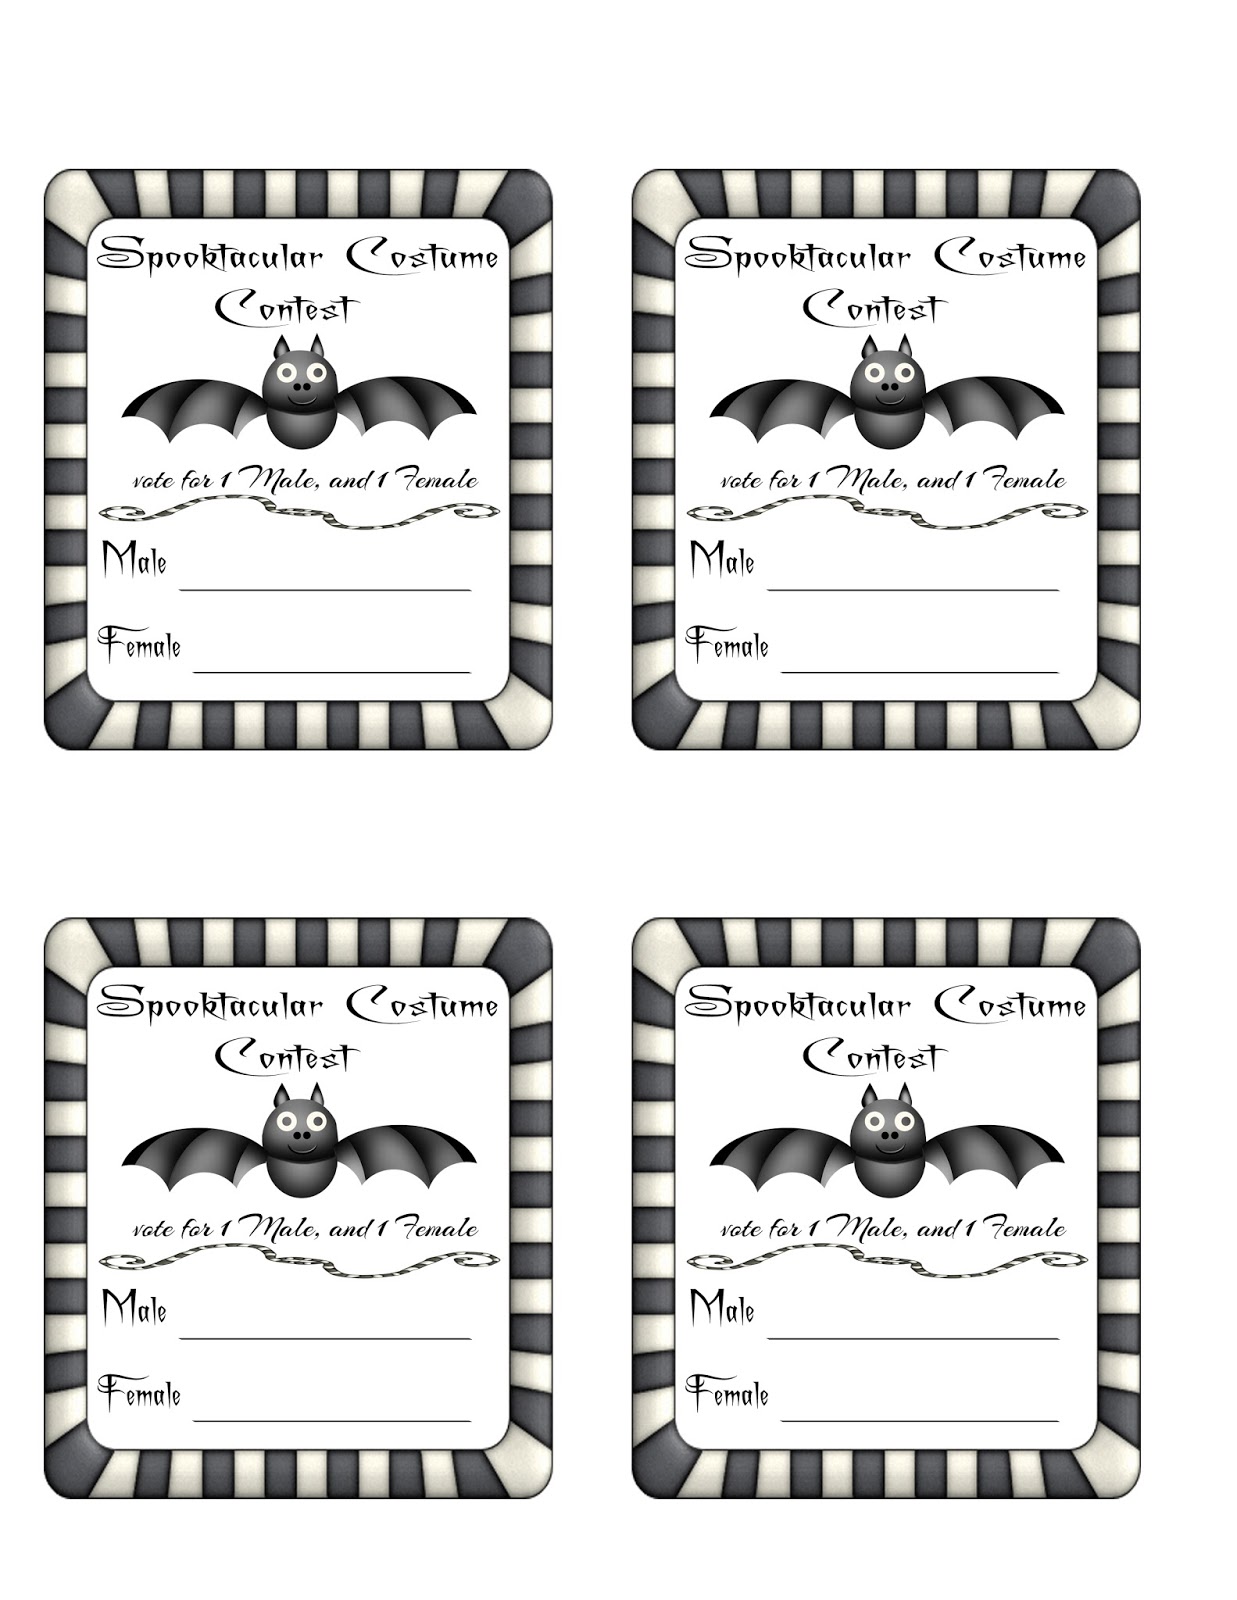 bewitching-babbles-freebie-halloween-costume-contest-voting-card